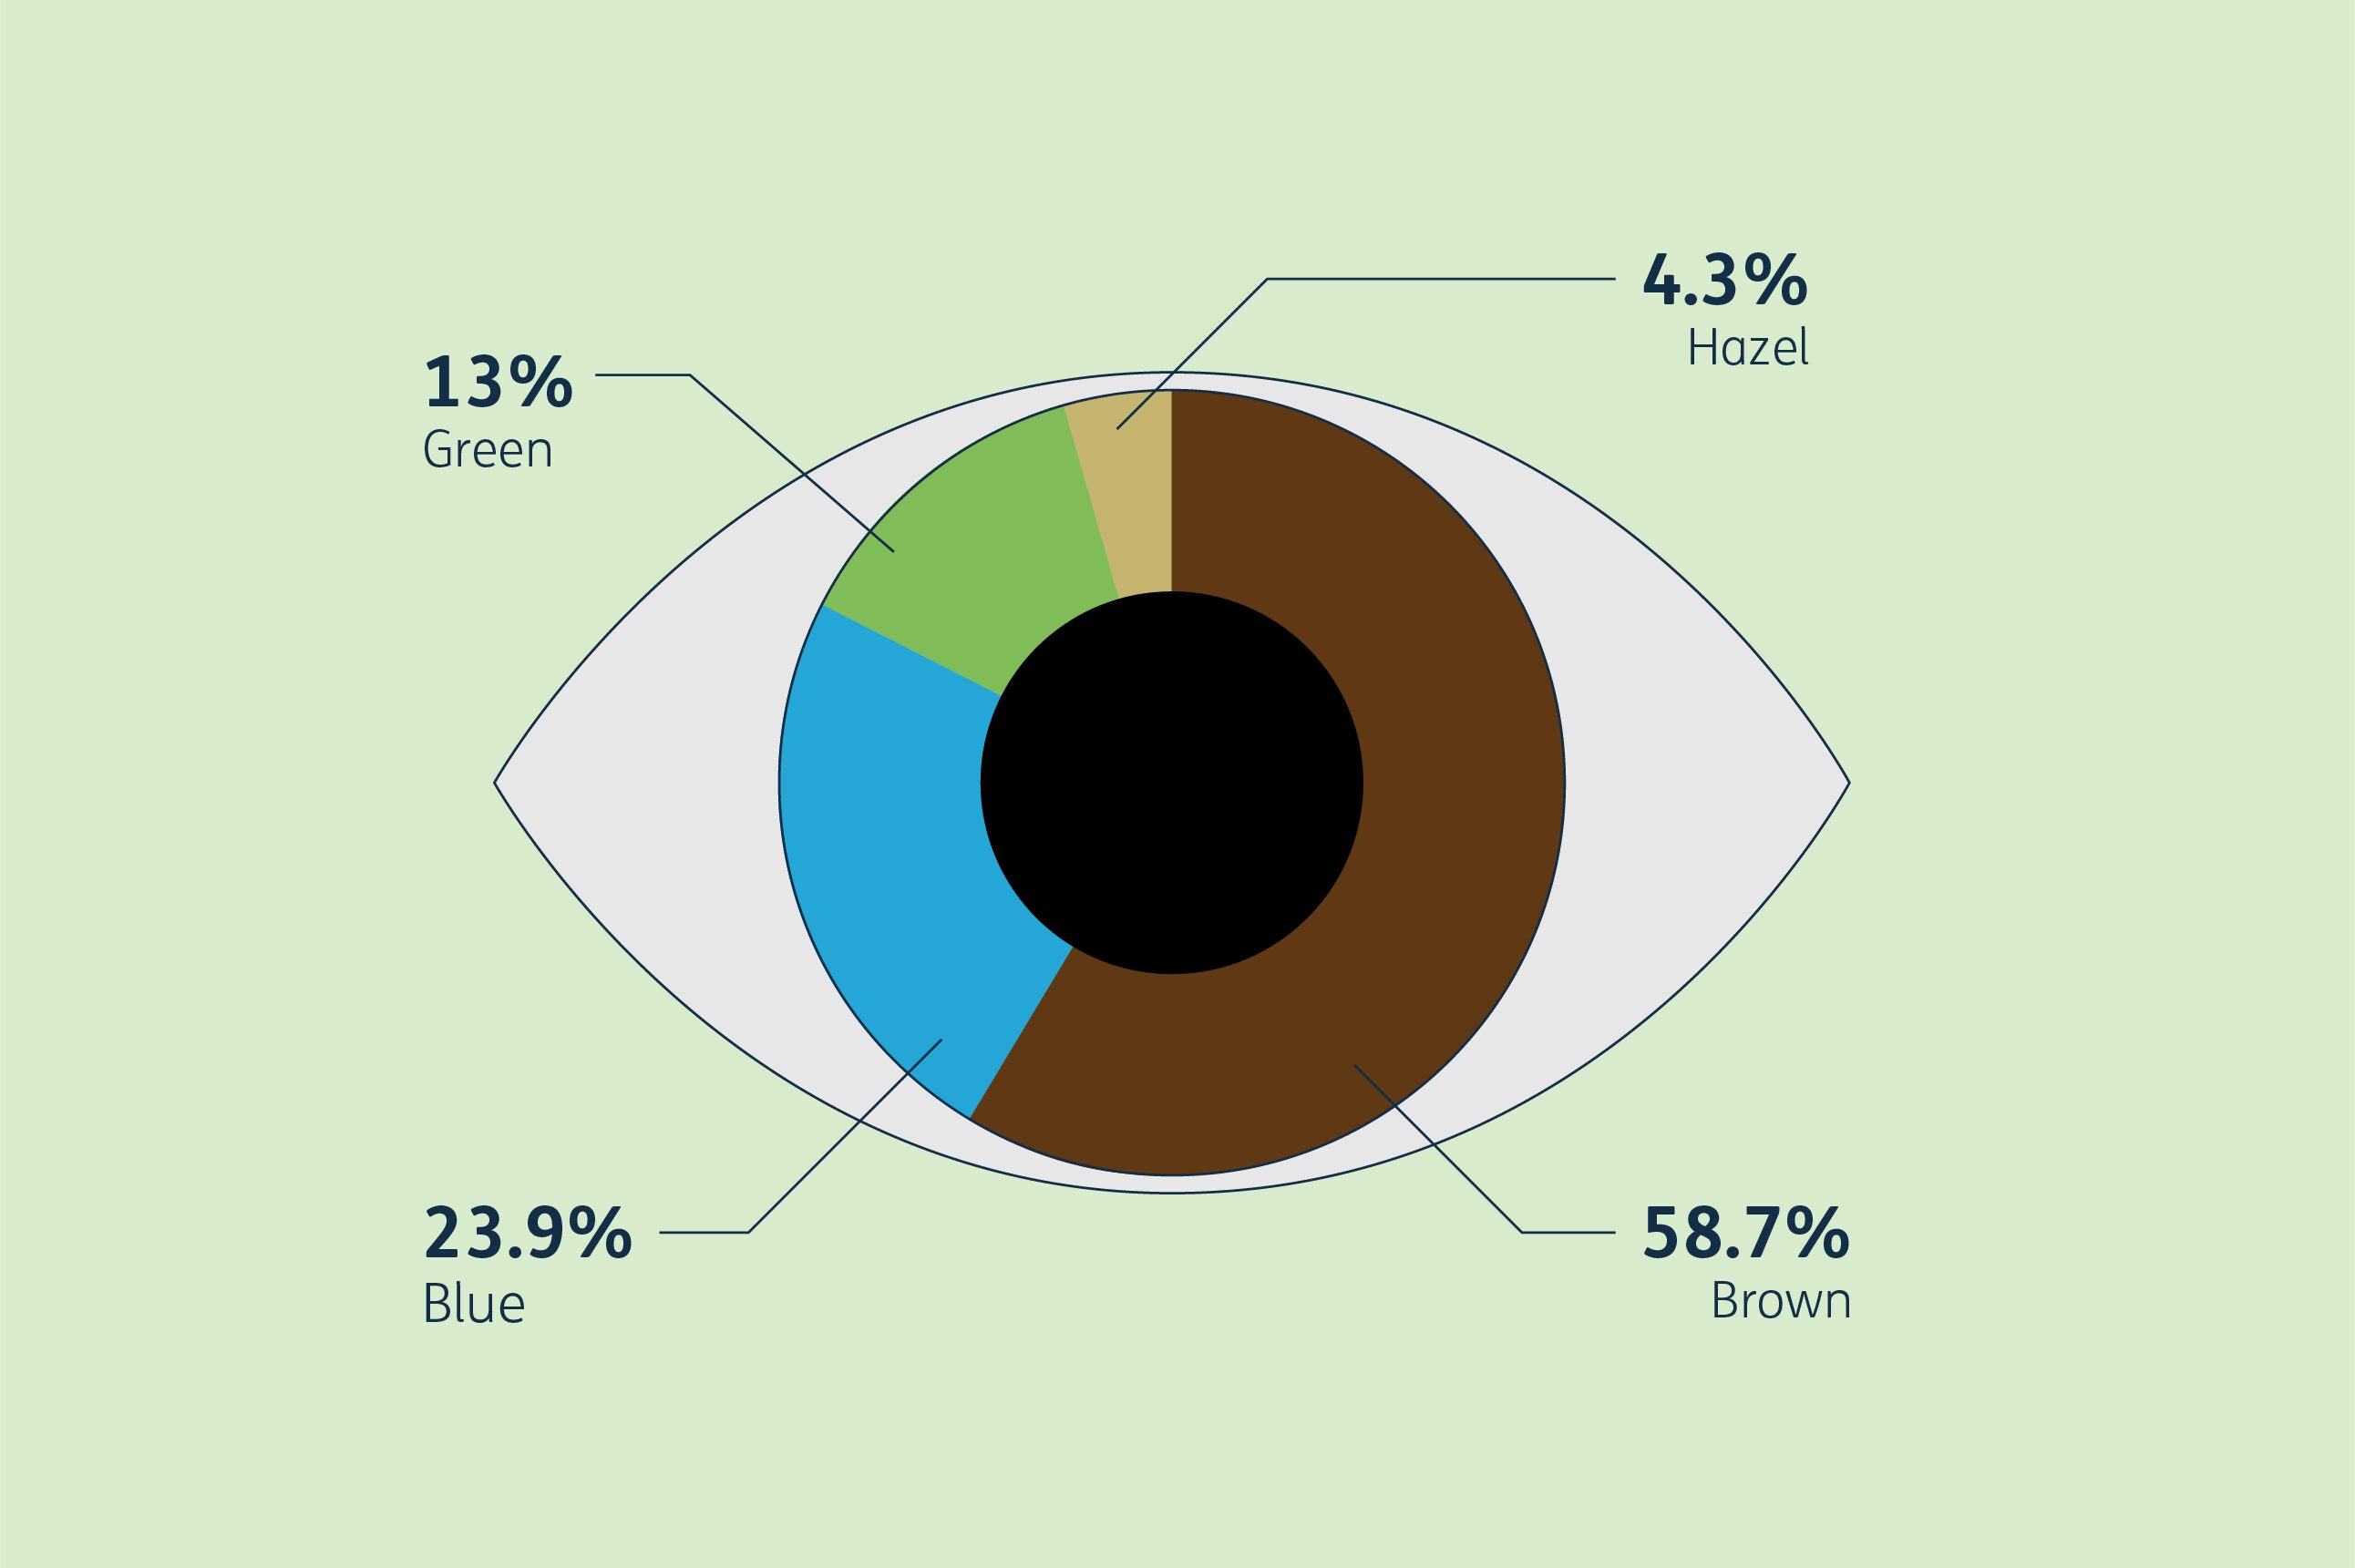 A donut pie chart in the shape of an eye, showing answers to Design102’s survey question: what colour are your eyes? The chart is divided into four eye colours. Brown: 58.7%. Blue: 23.9%. Green: 13%. Hazel: 4.3%.